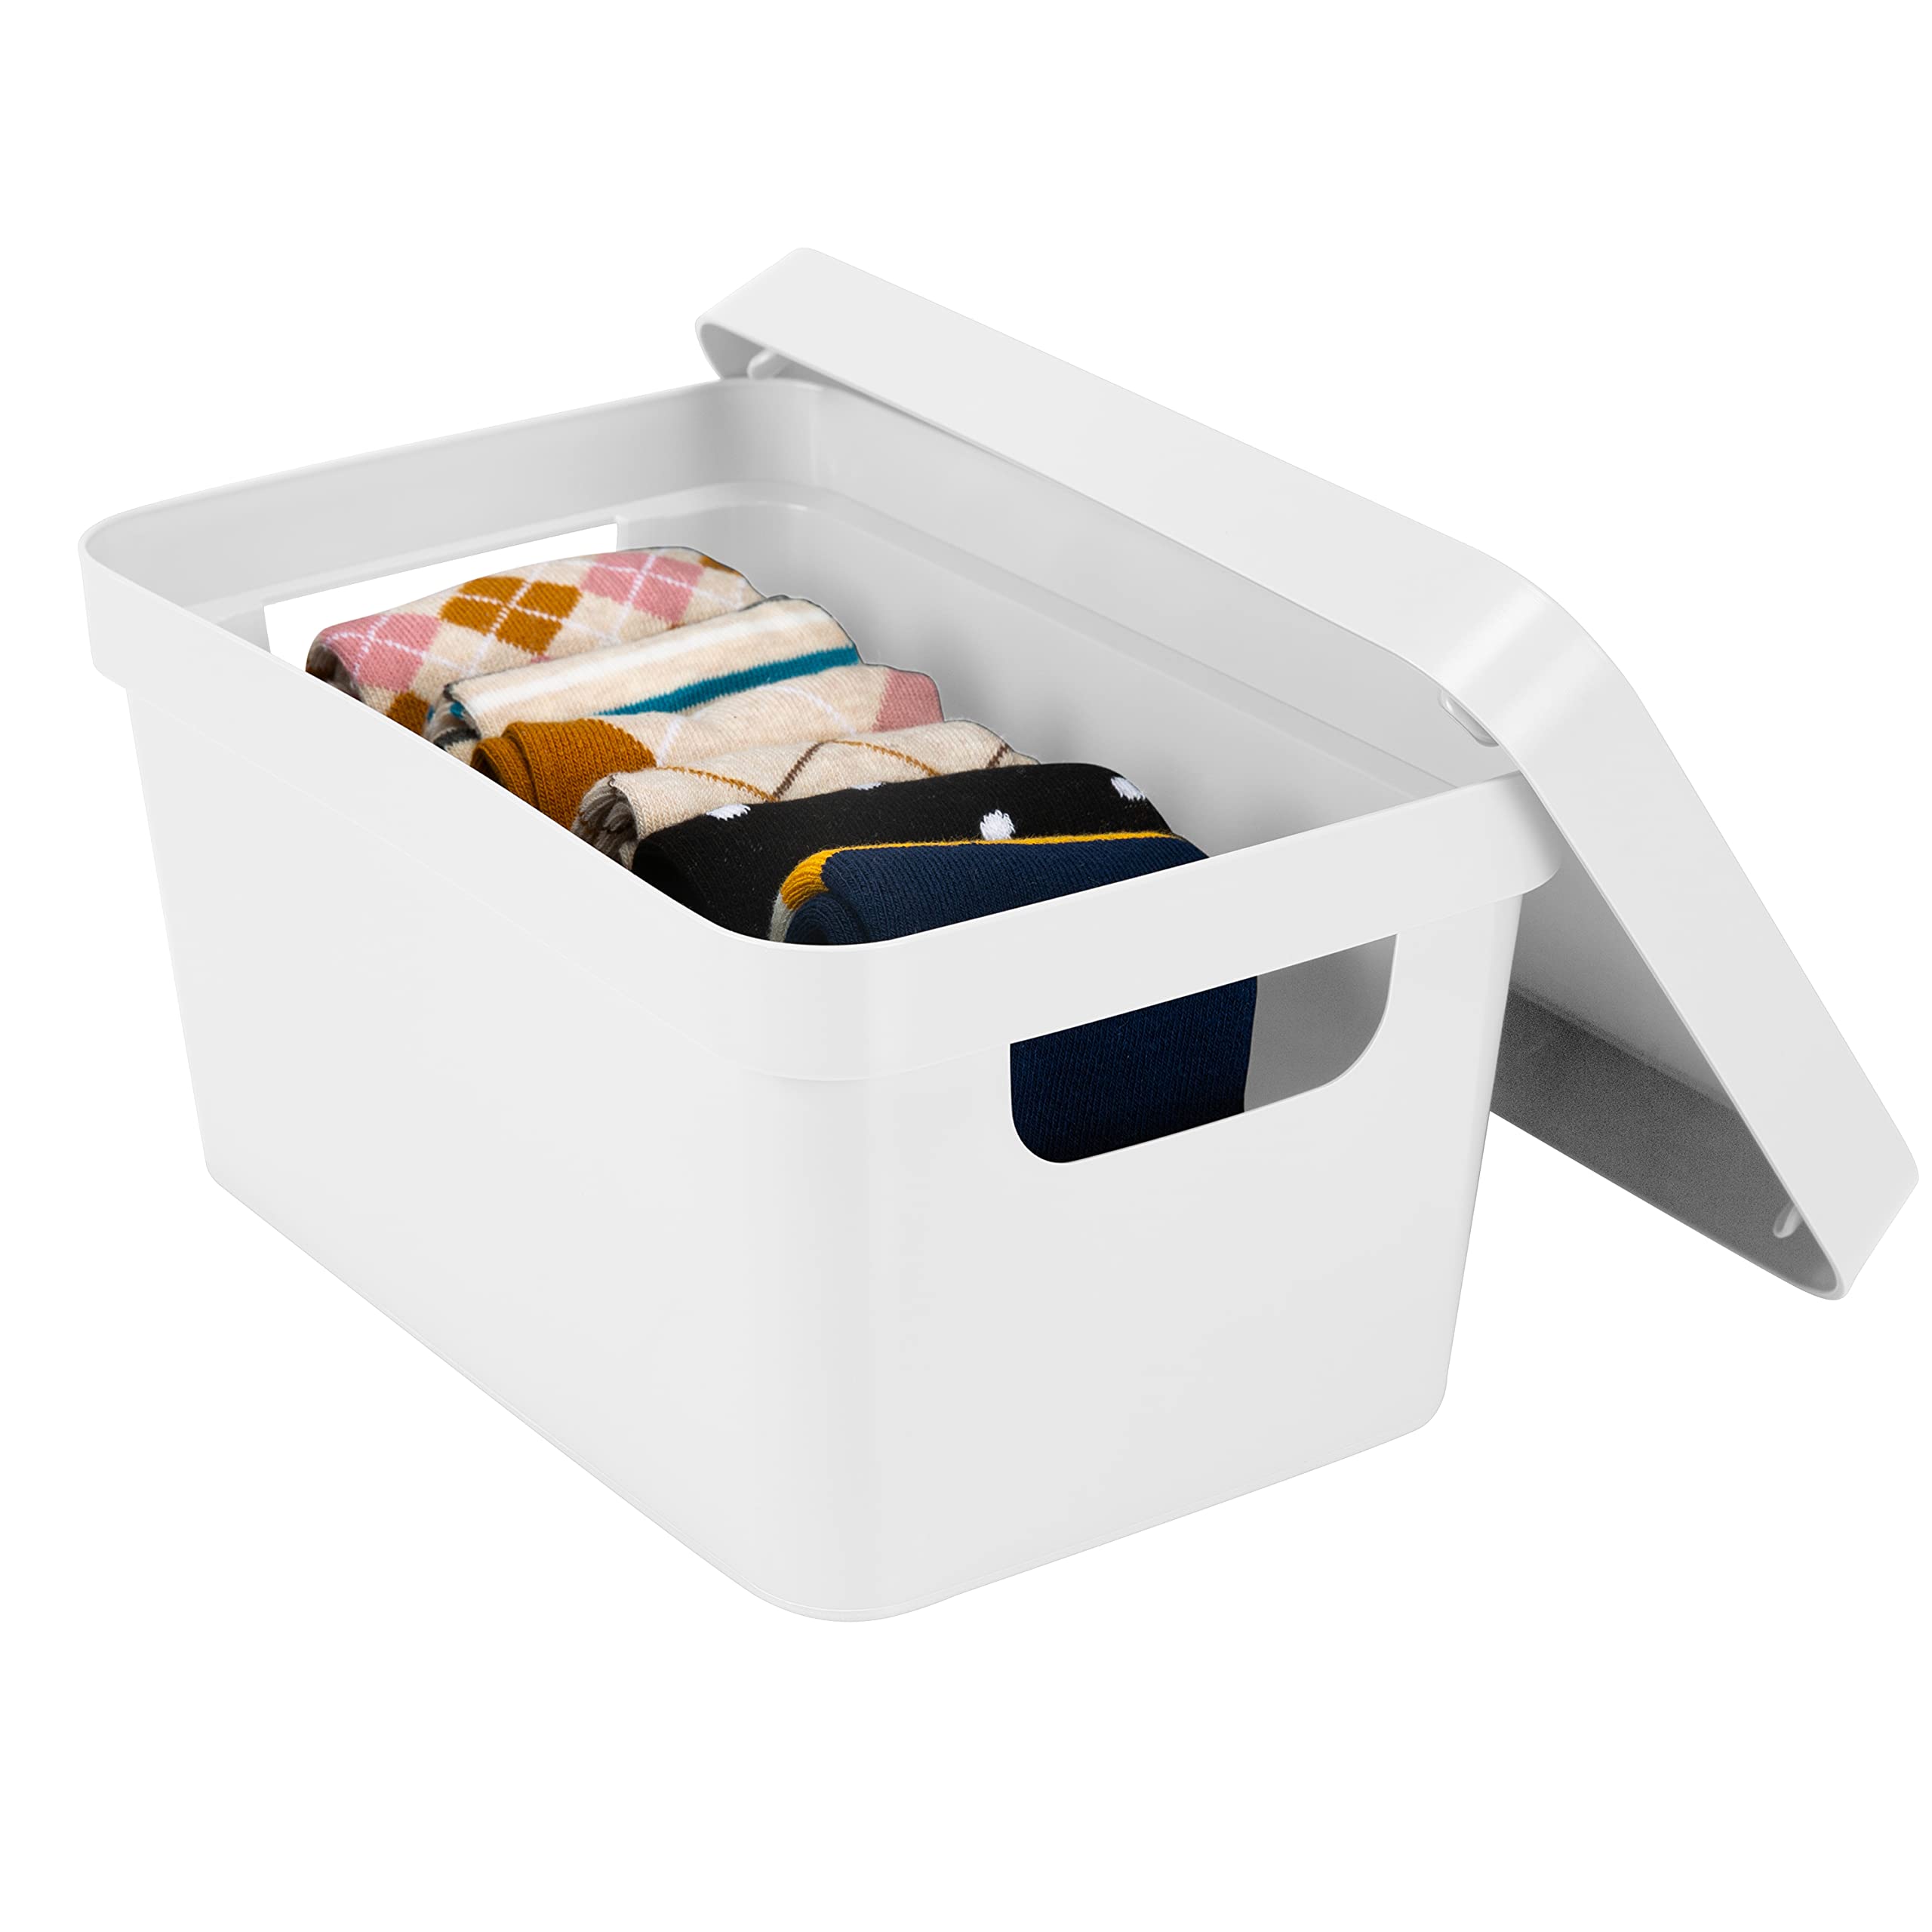 Simplify Small Vinto Storage Box | Click Tight Lid | Dimensions: 9.76" x 6.69" x 4.84" | Stackable | Home Organization | 2 Handles | White